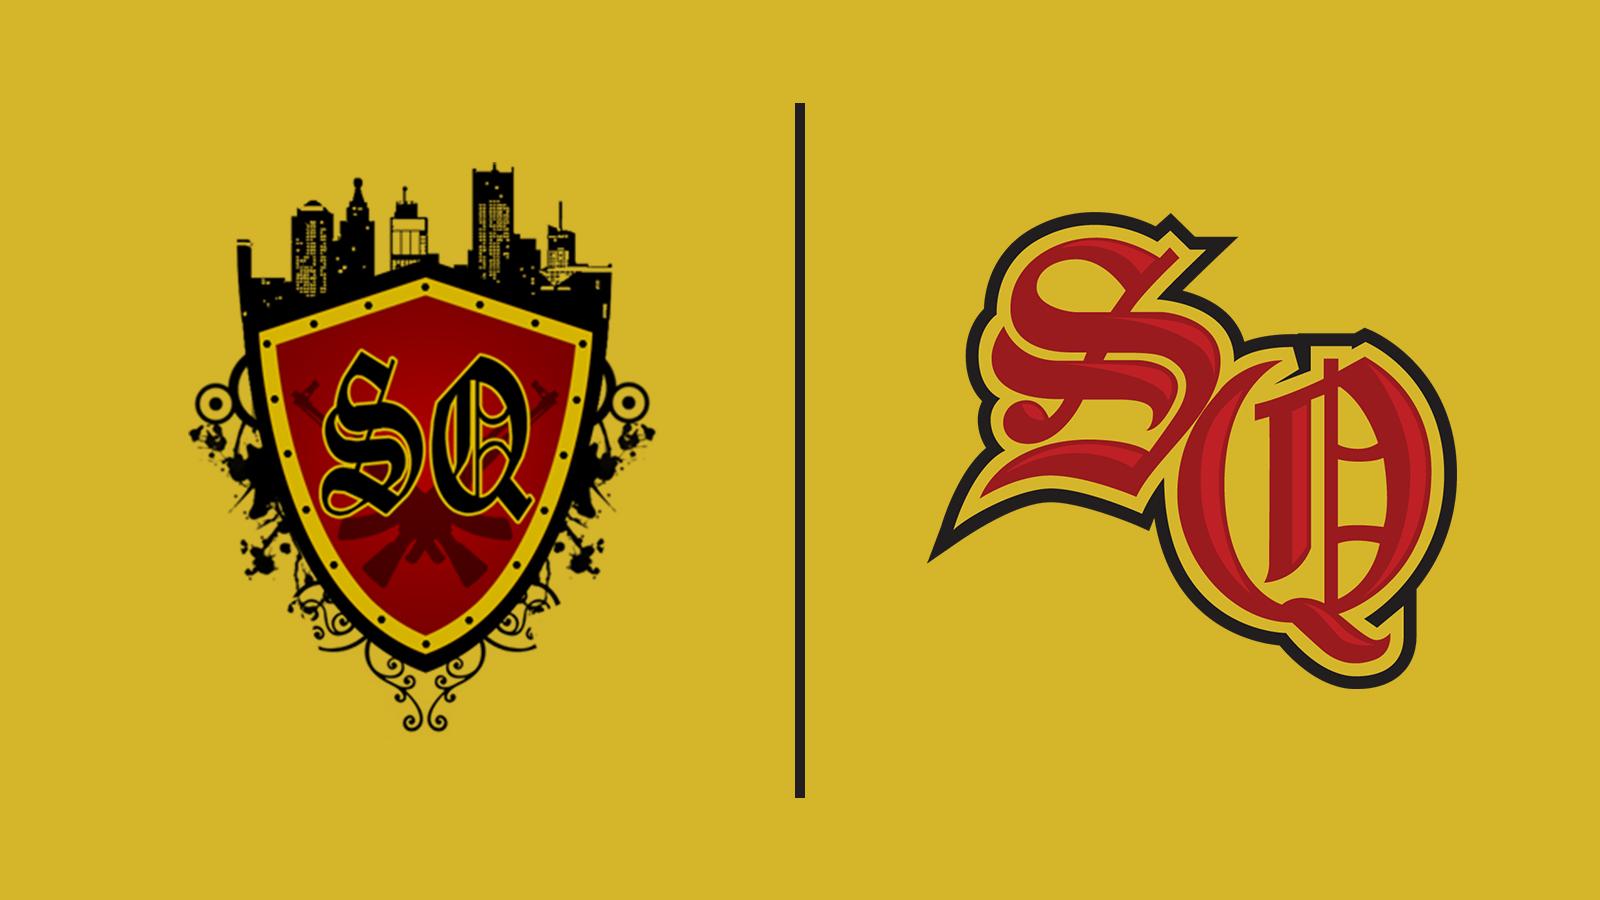 Status Quo old and new logos